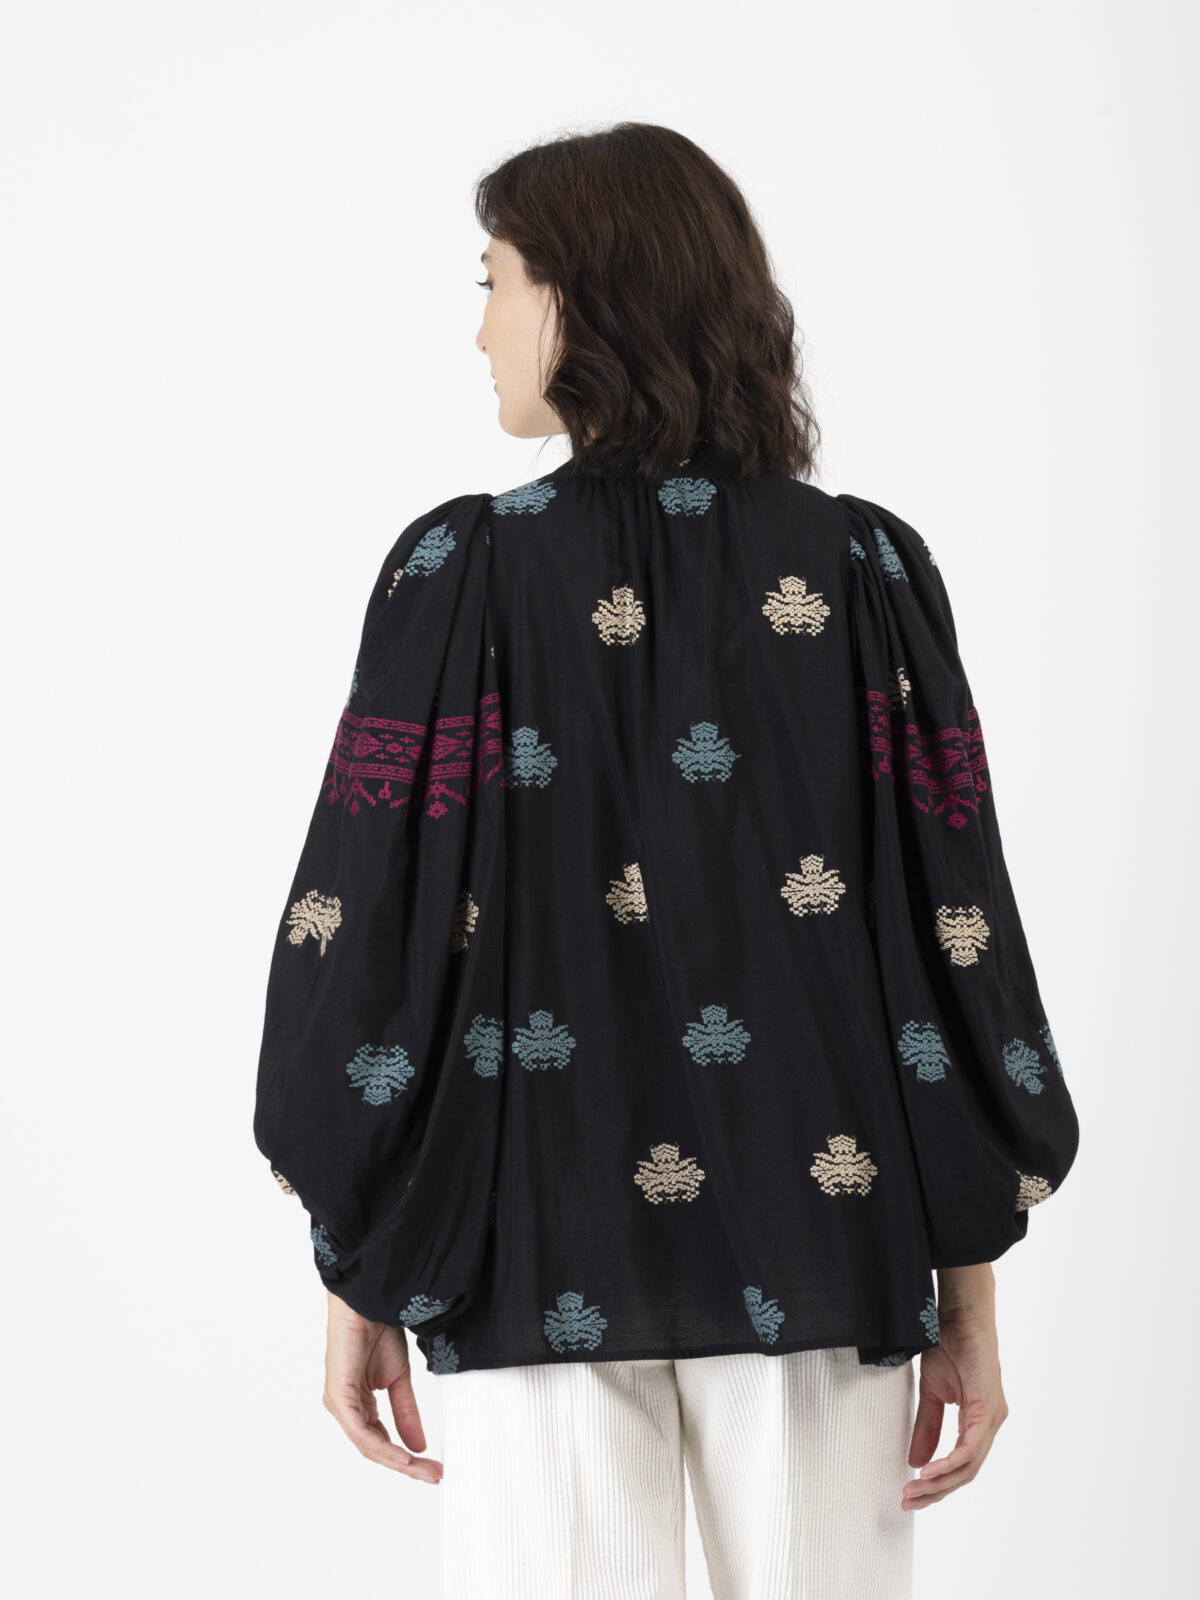 bell-blouse-vanessa-bruno-embroidery-puffy-sleeves-matchboxathens